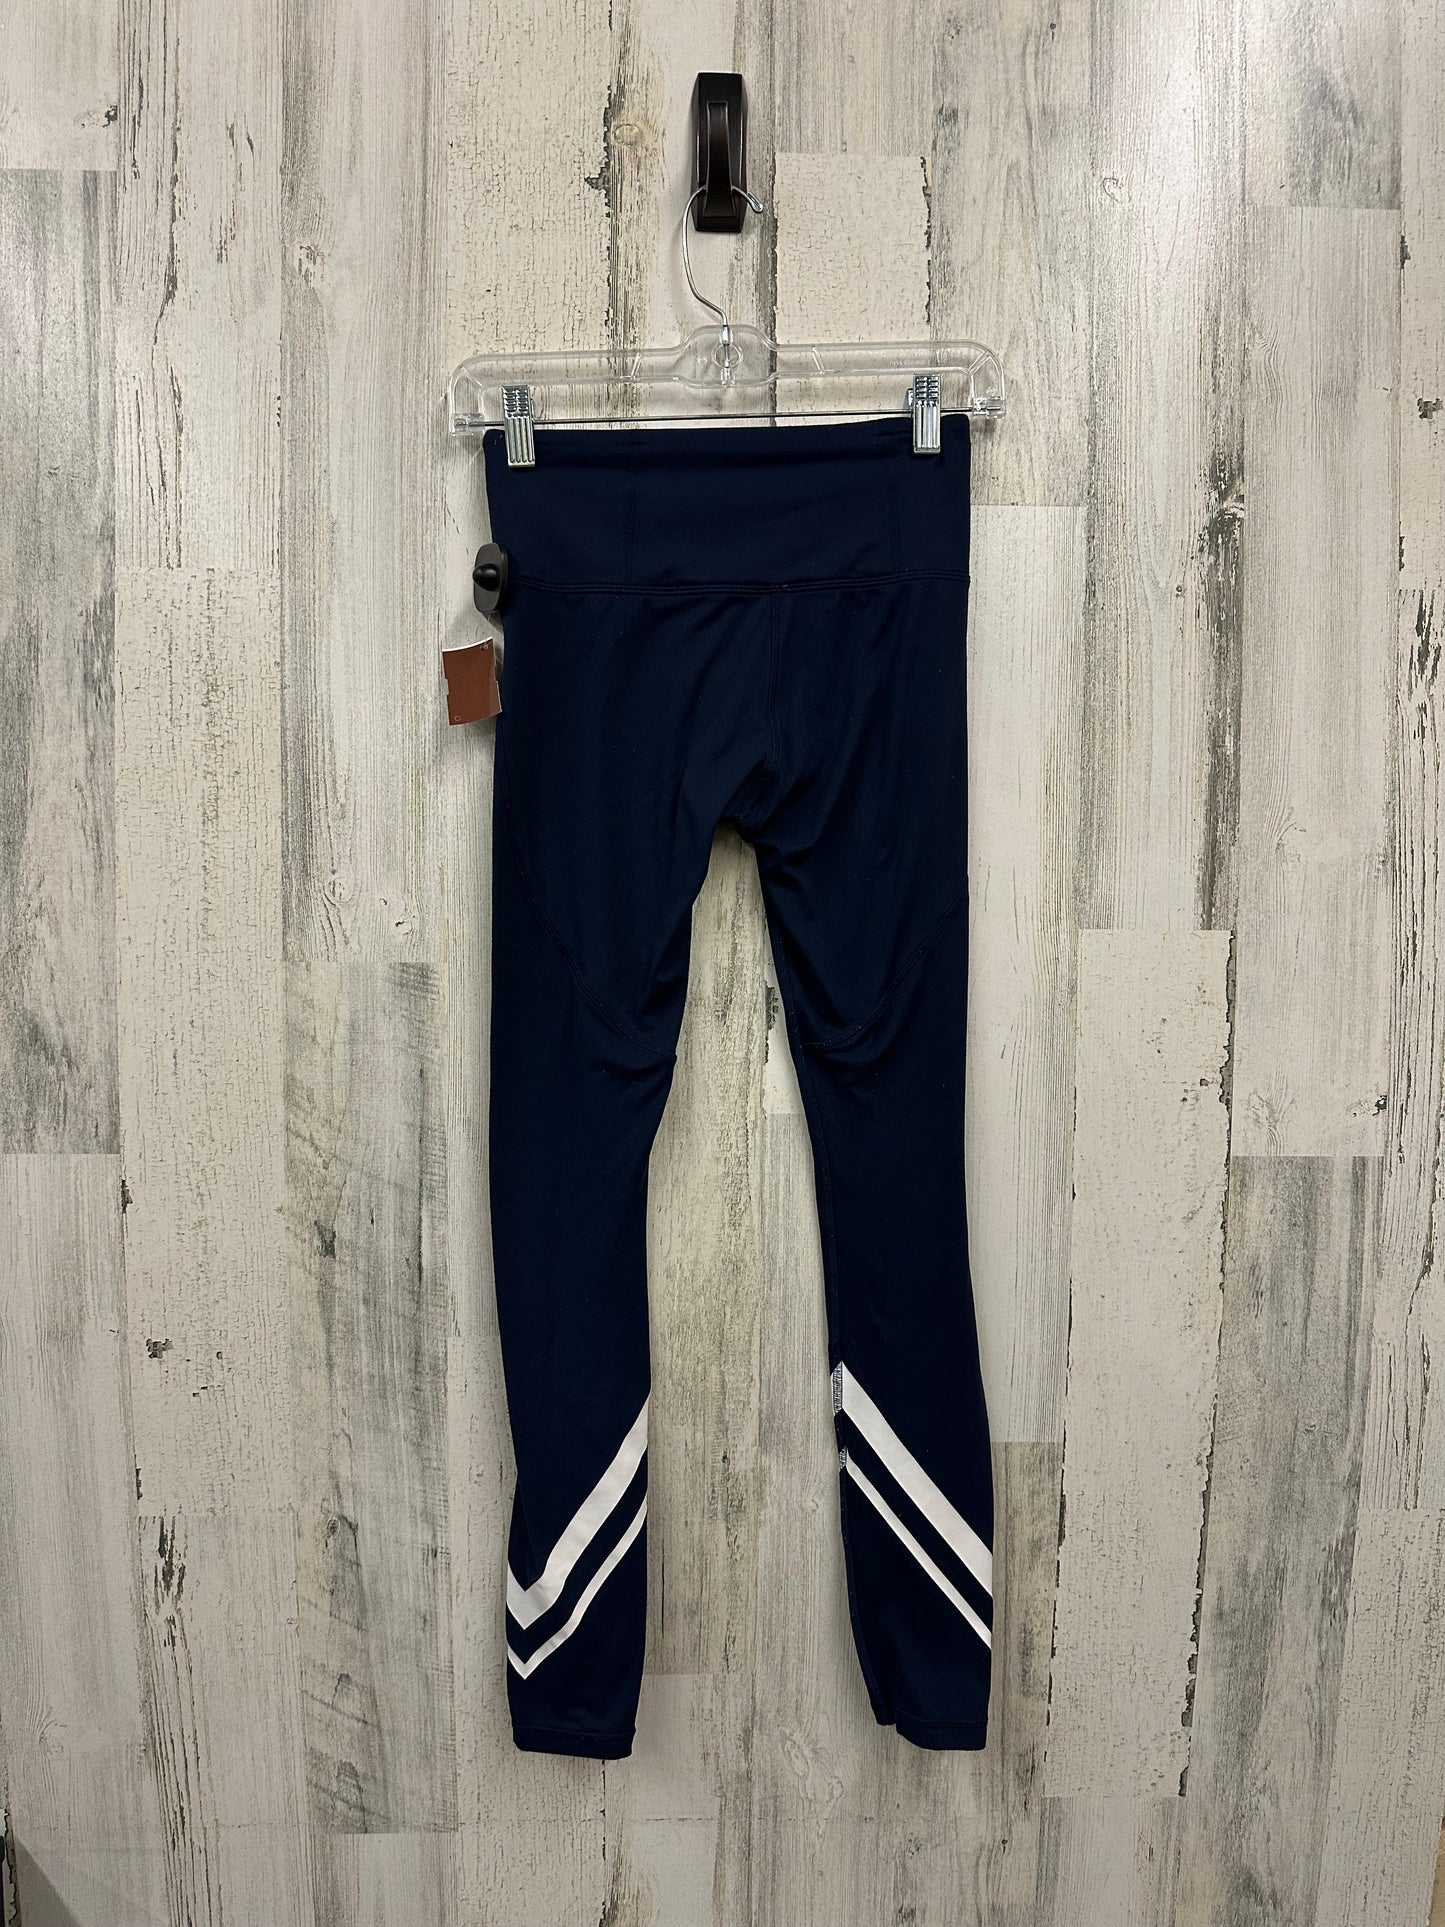 Athletic Leggings By Tory Burch  Size: Xs